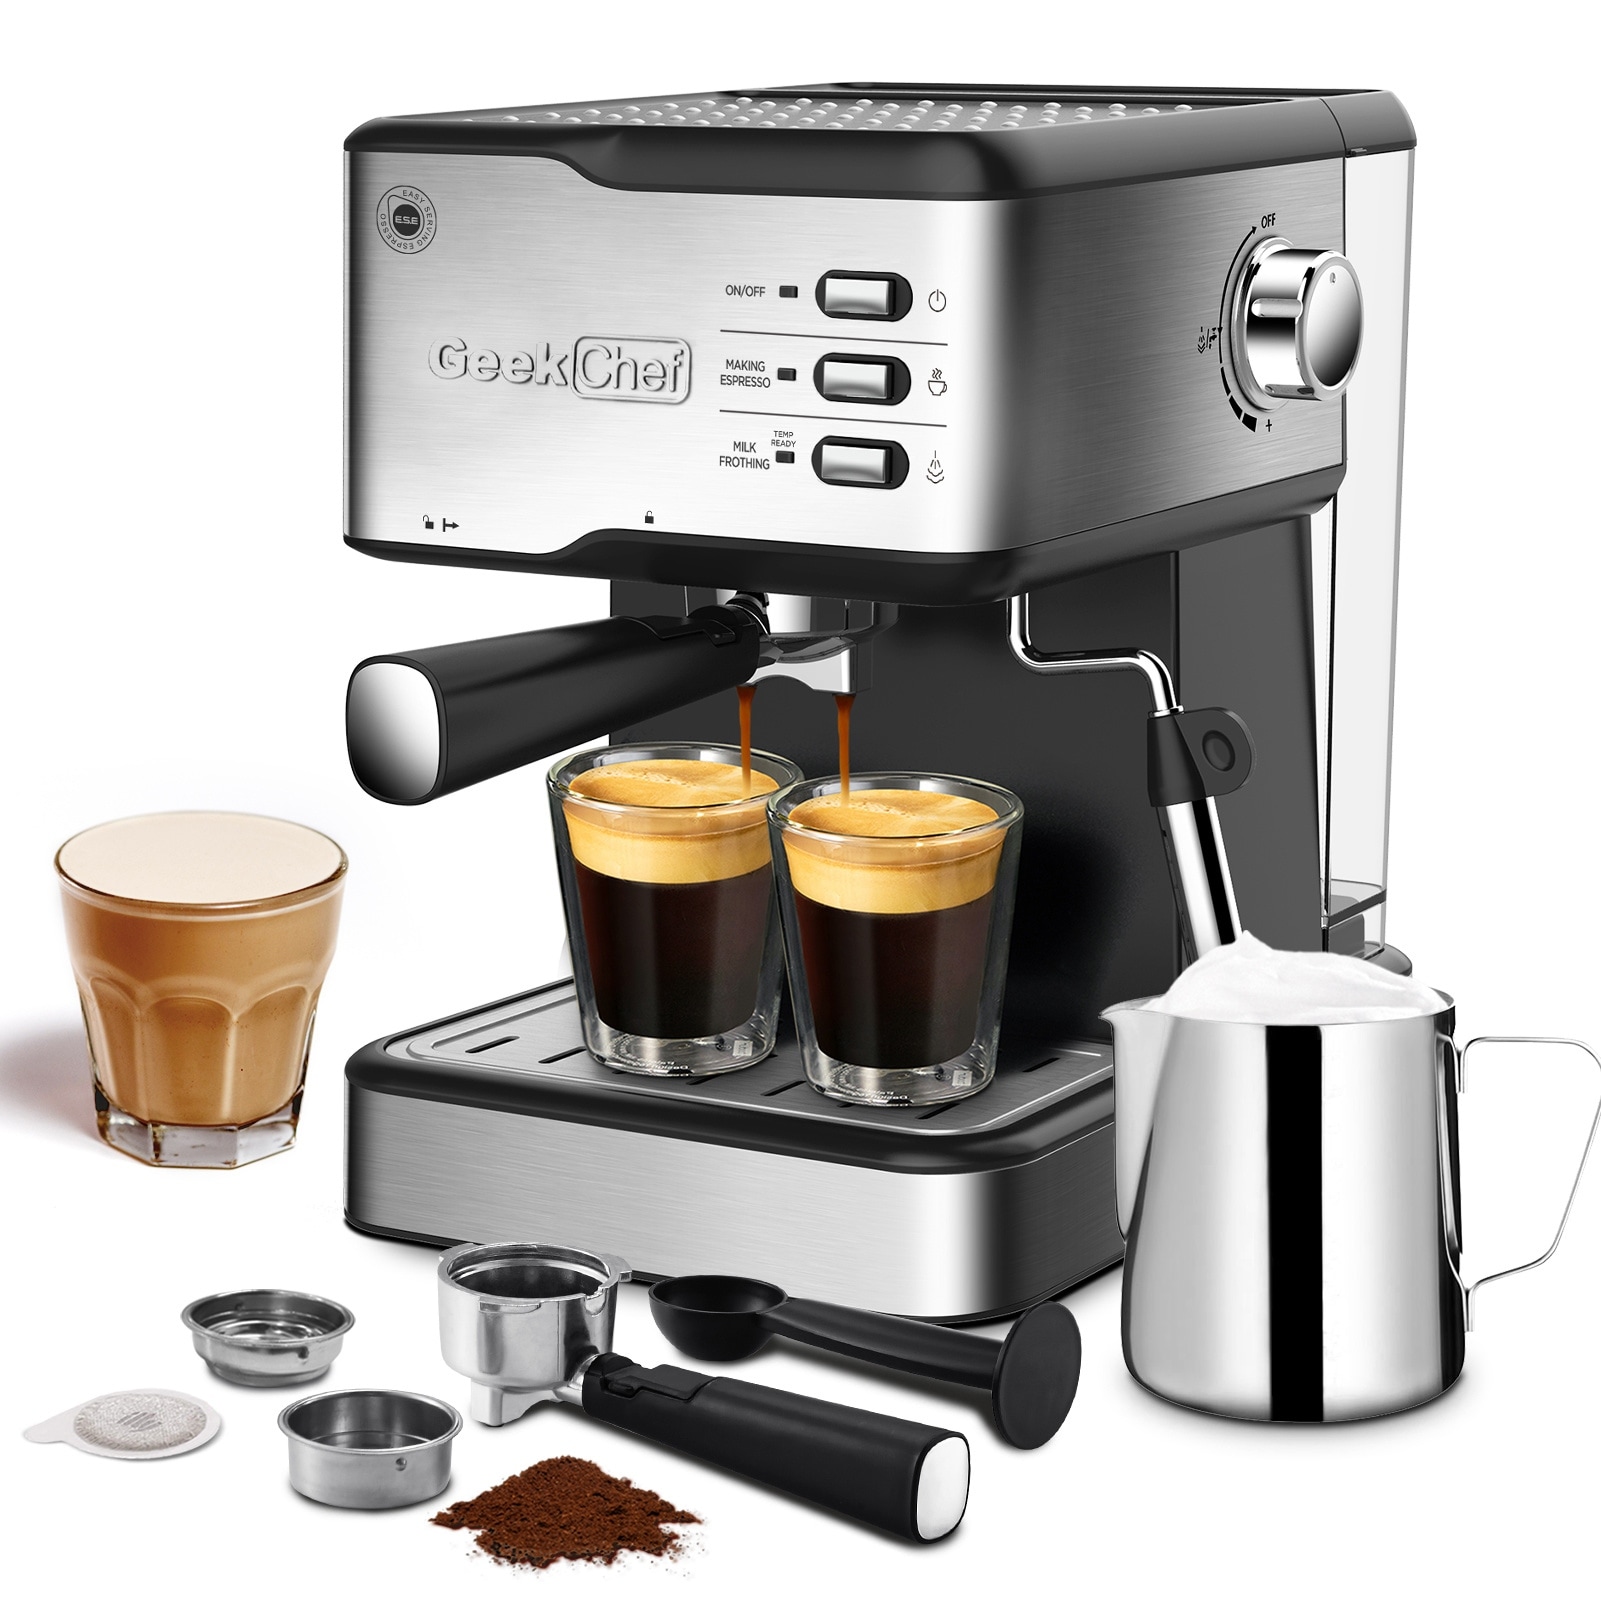 https://ak1.ostkcdn.com/images/products/is/images/direct/8eb3aff5d332a2a9762ec8f8999c3e8017542a69/20Bar-Espresso-Machine-Coffee-Maker-Milk-Frother-1.5L-Tank.jpg